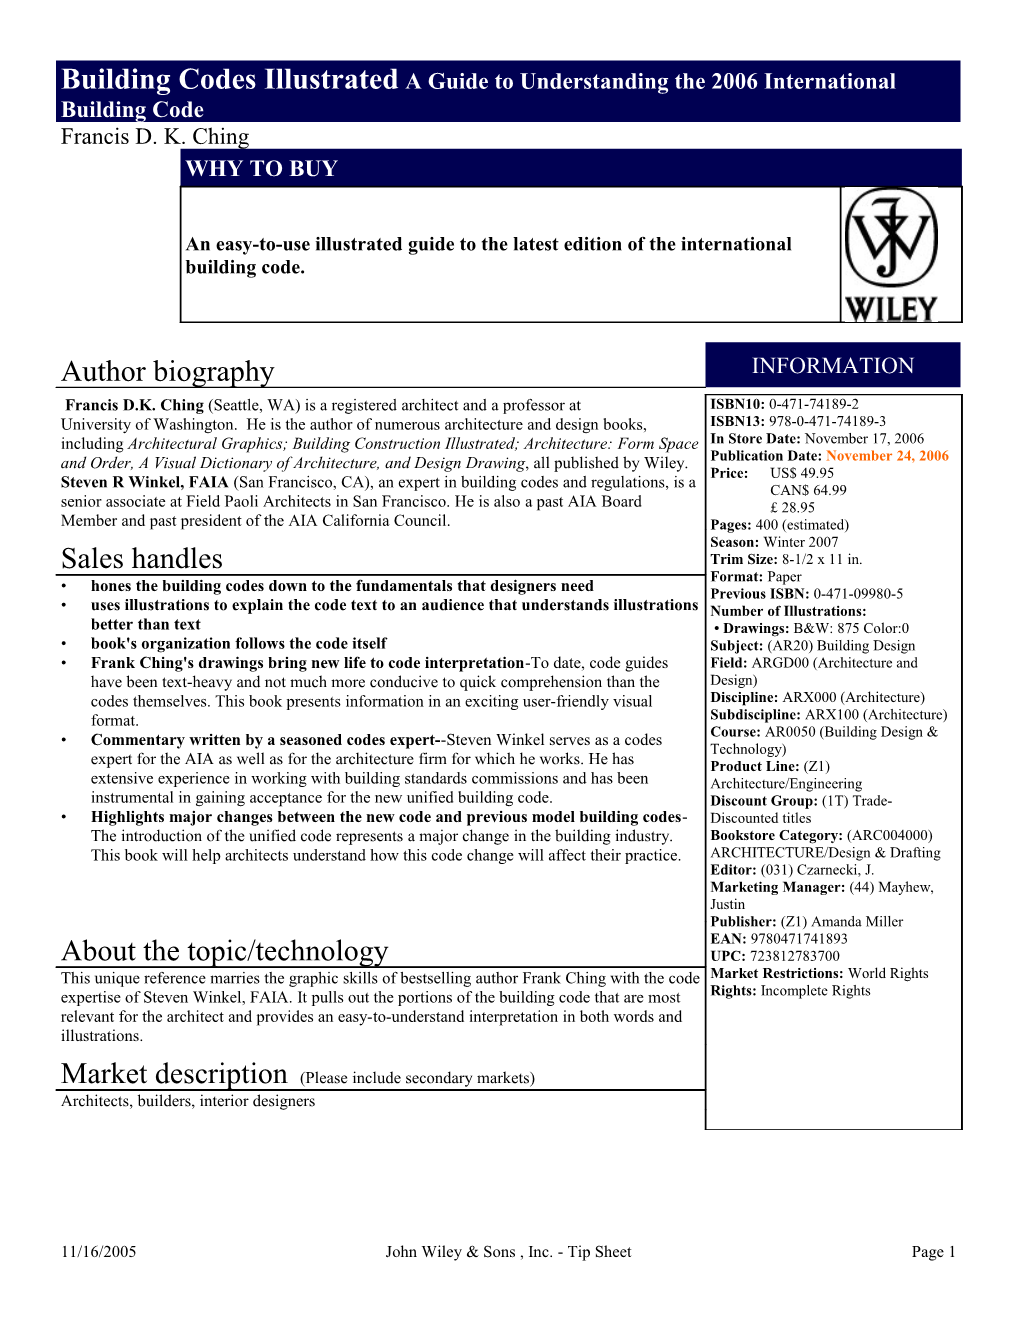 11/16/2005John Wiley & Sons , Inc. - Tip Sheet Page 1